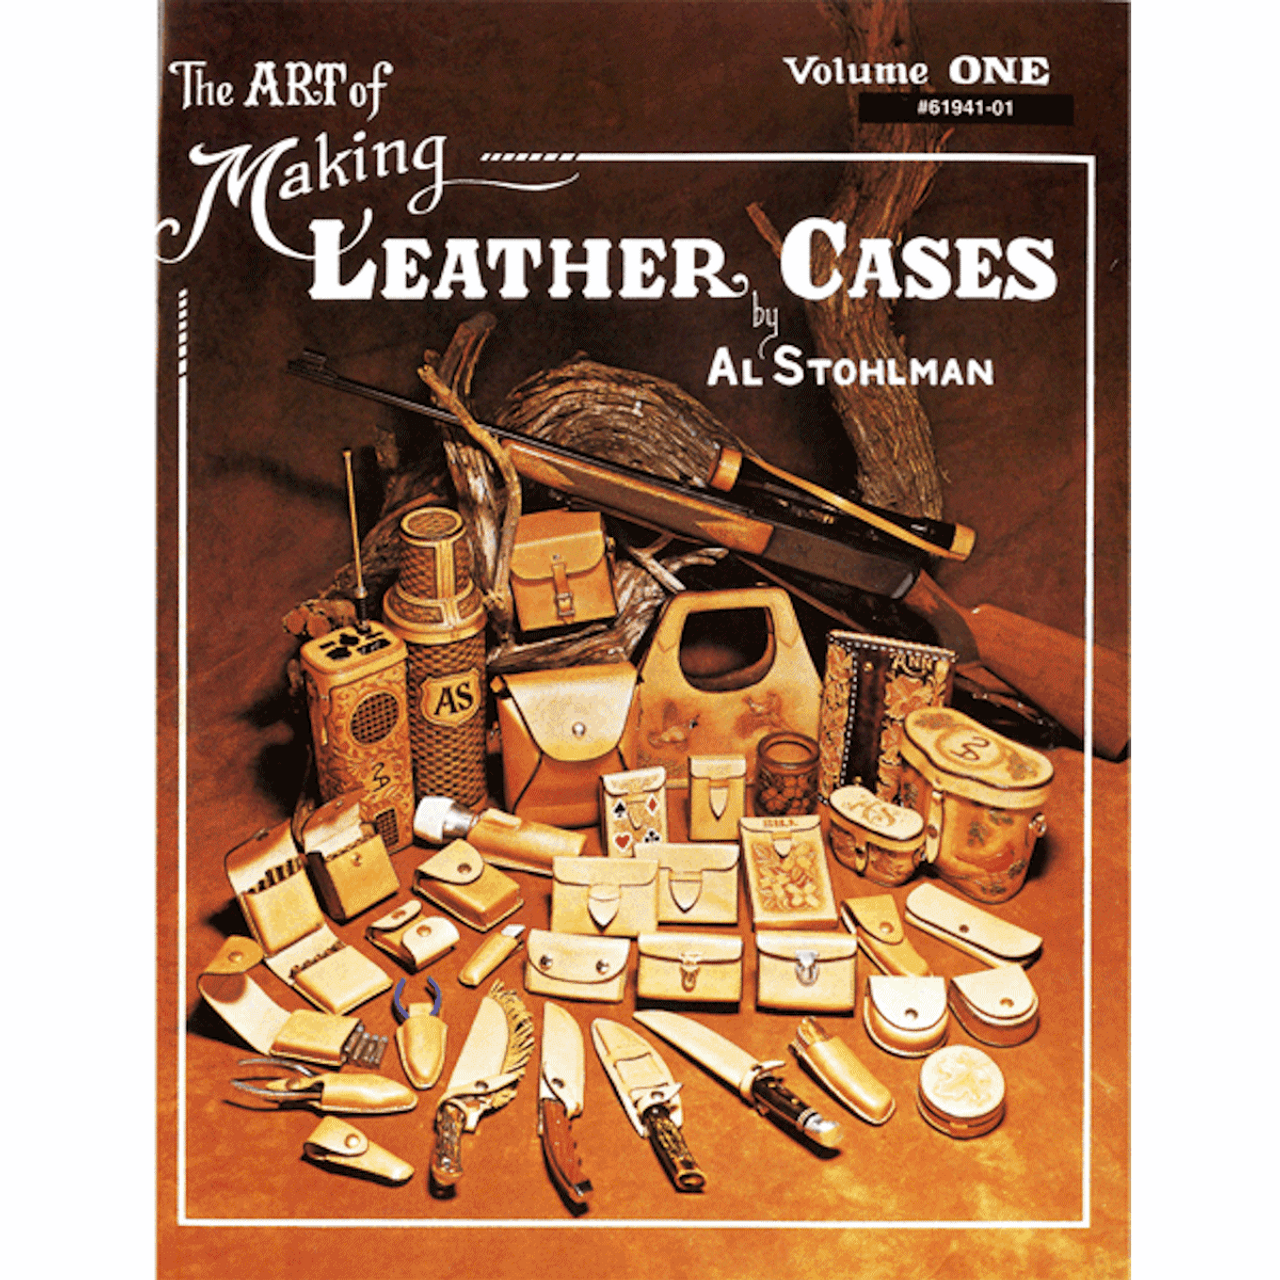 Art of Making Leather Cases Volume One 61941-01